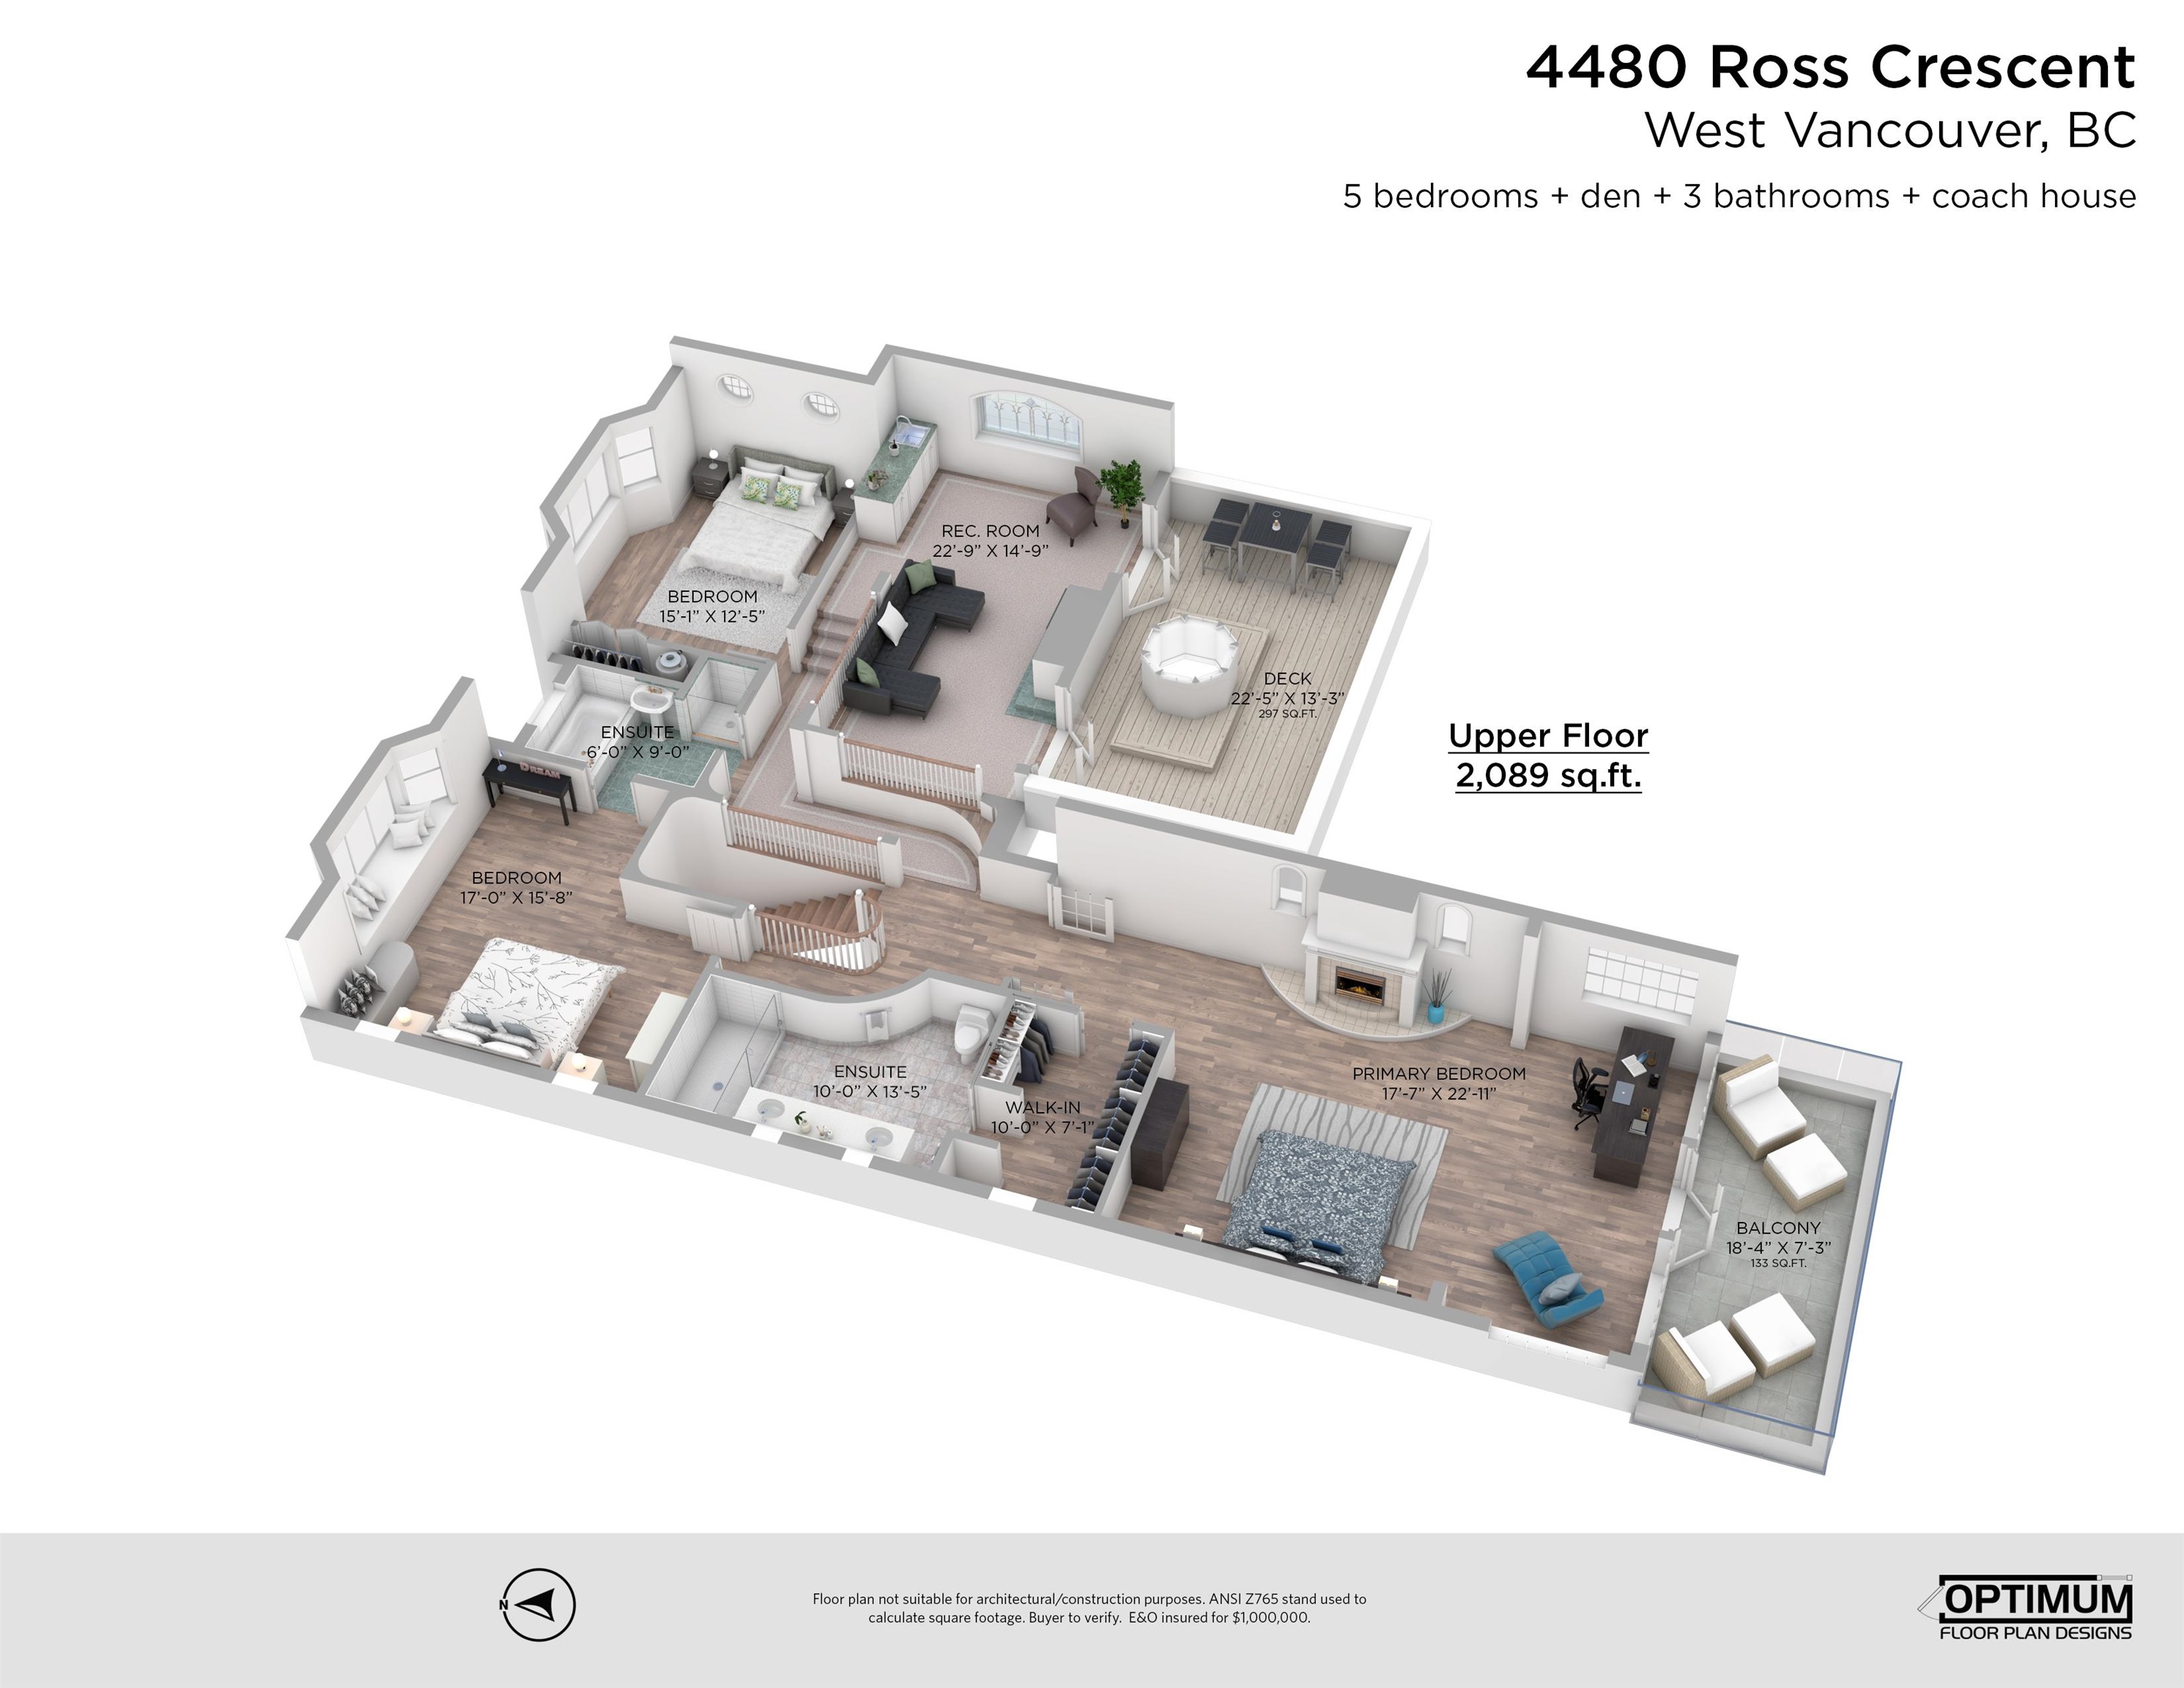 Listing image of 4480 ROSS CRESCENT